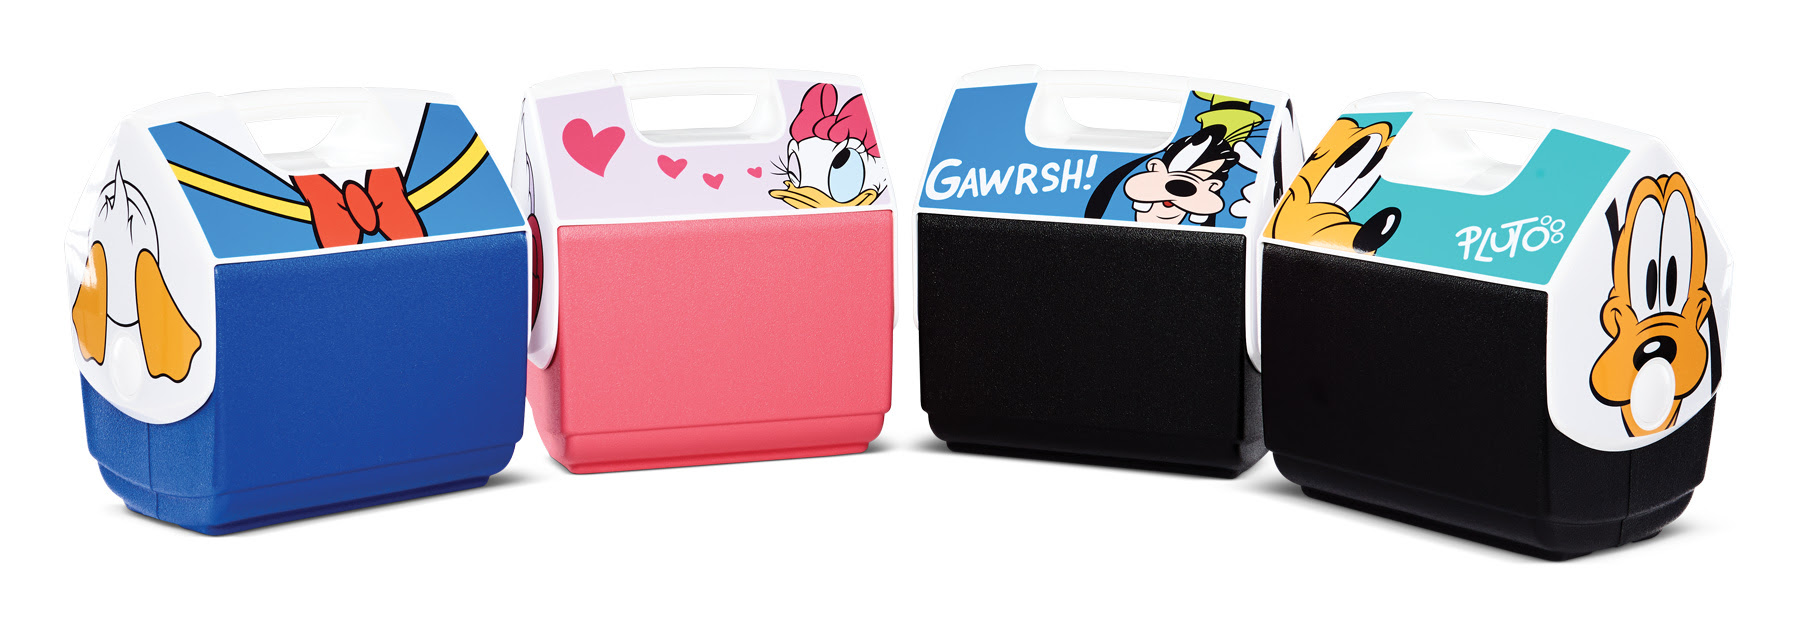 Igloo Teams Up With Disney and Friends to Launch its newest line of coolers